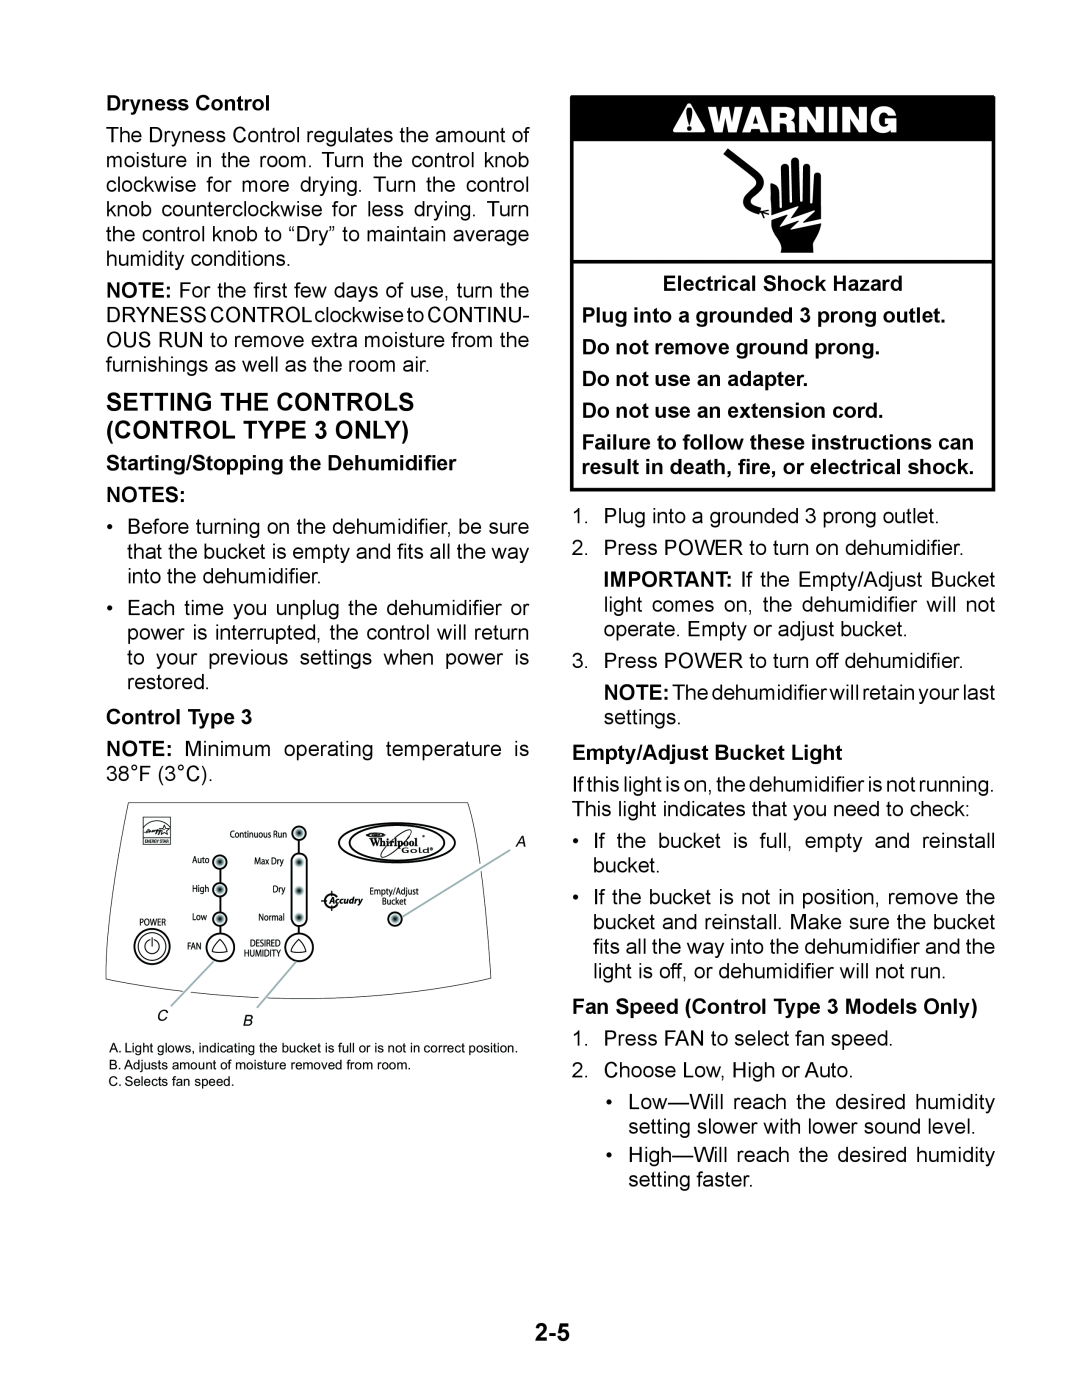 Whirlpool AD70USS manual SETTING THE CONTROLS CONTROL TYPE 3 ONLY, Dryness Control, Starting/Stopping the Dehumidiﬁer NOTES 